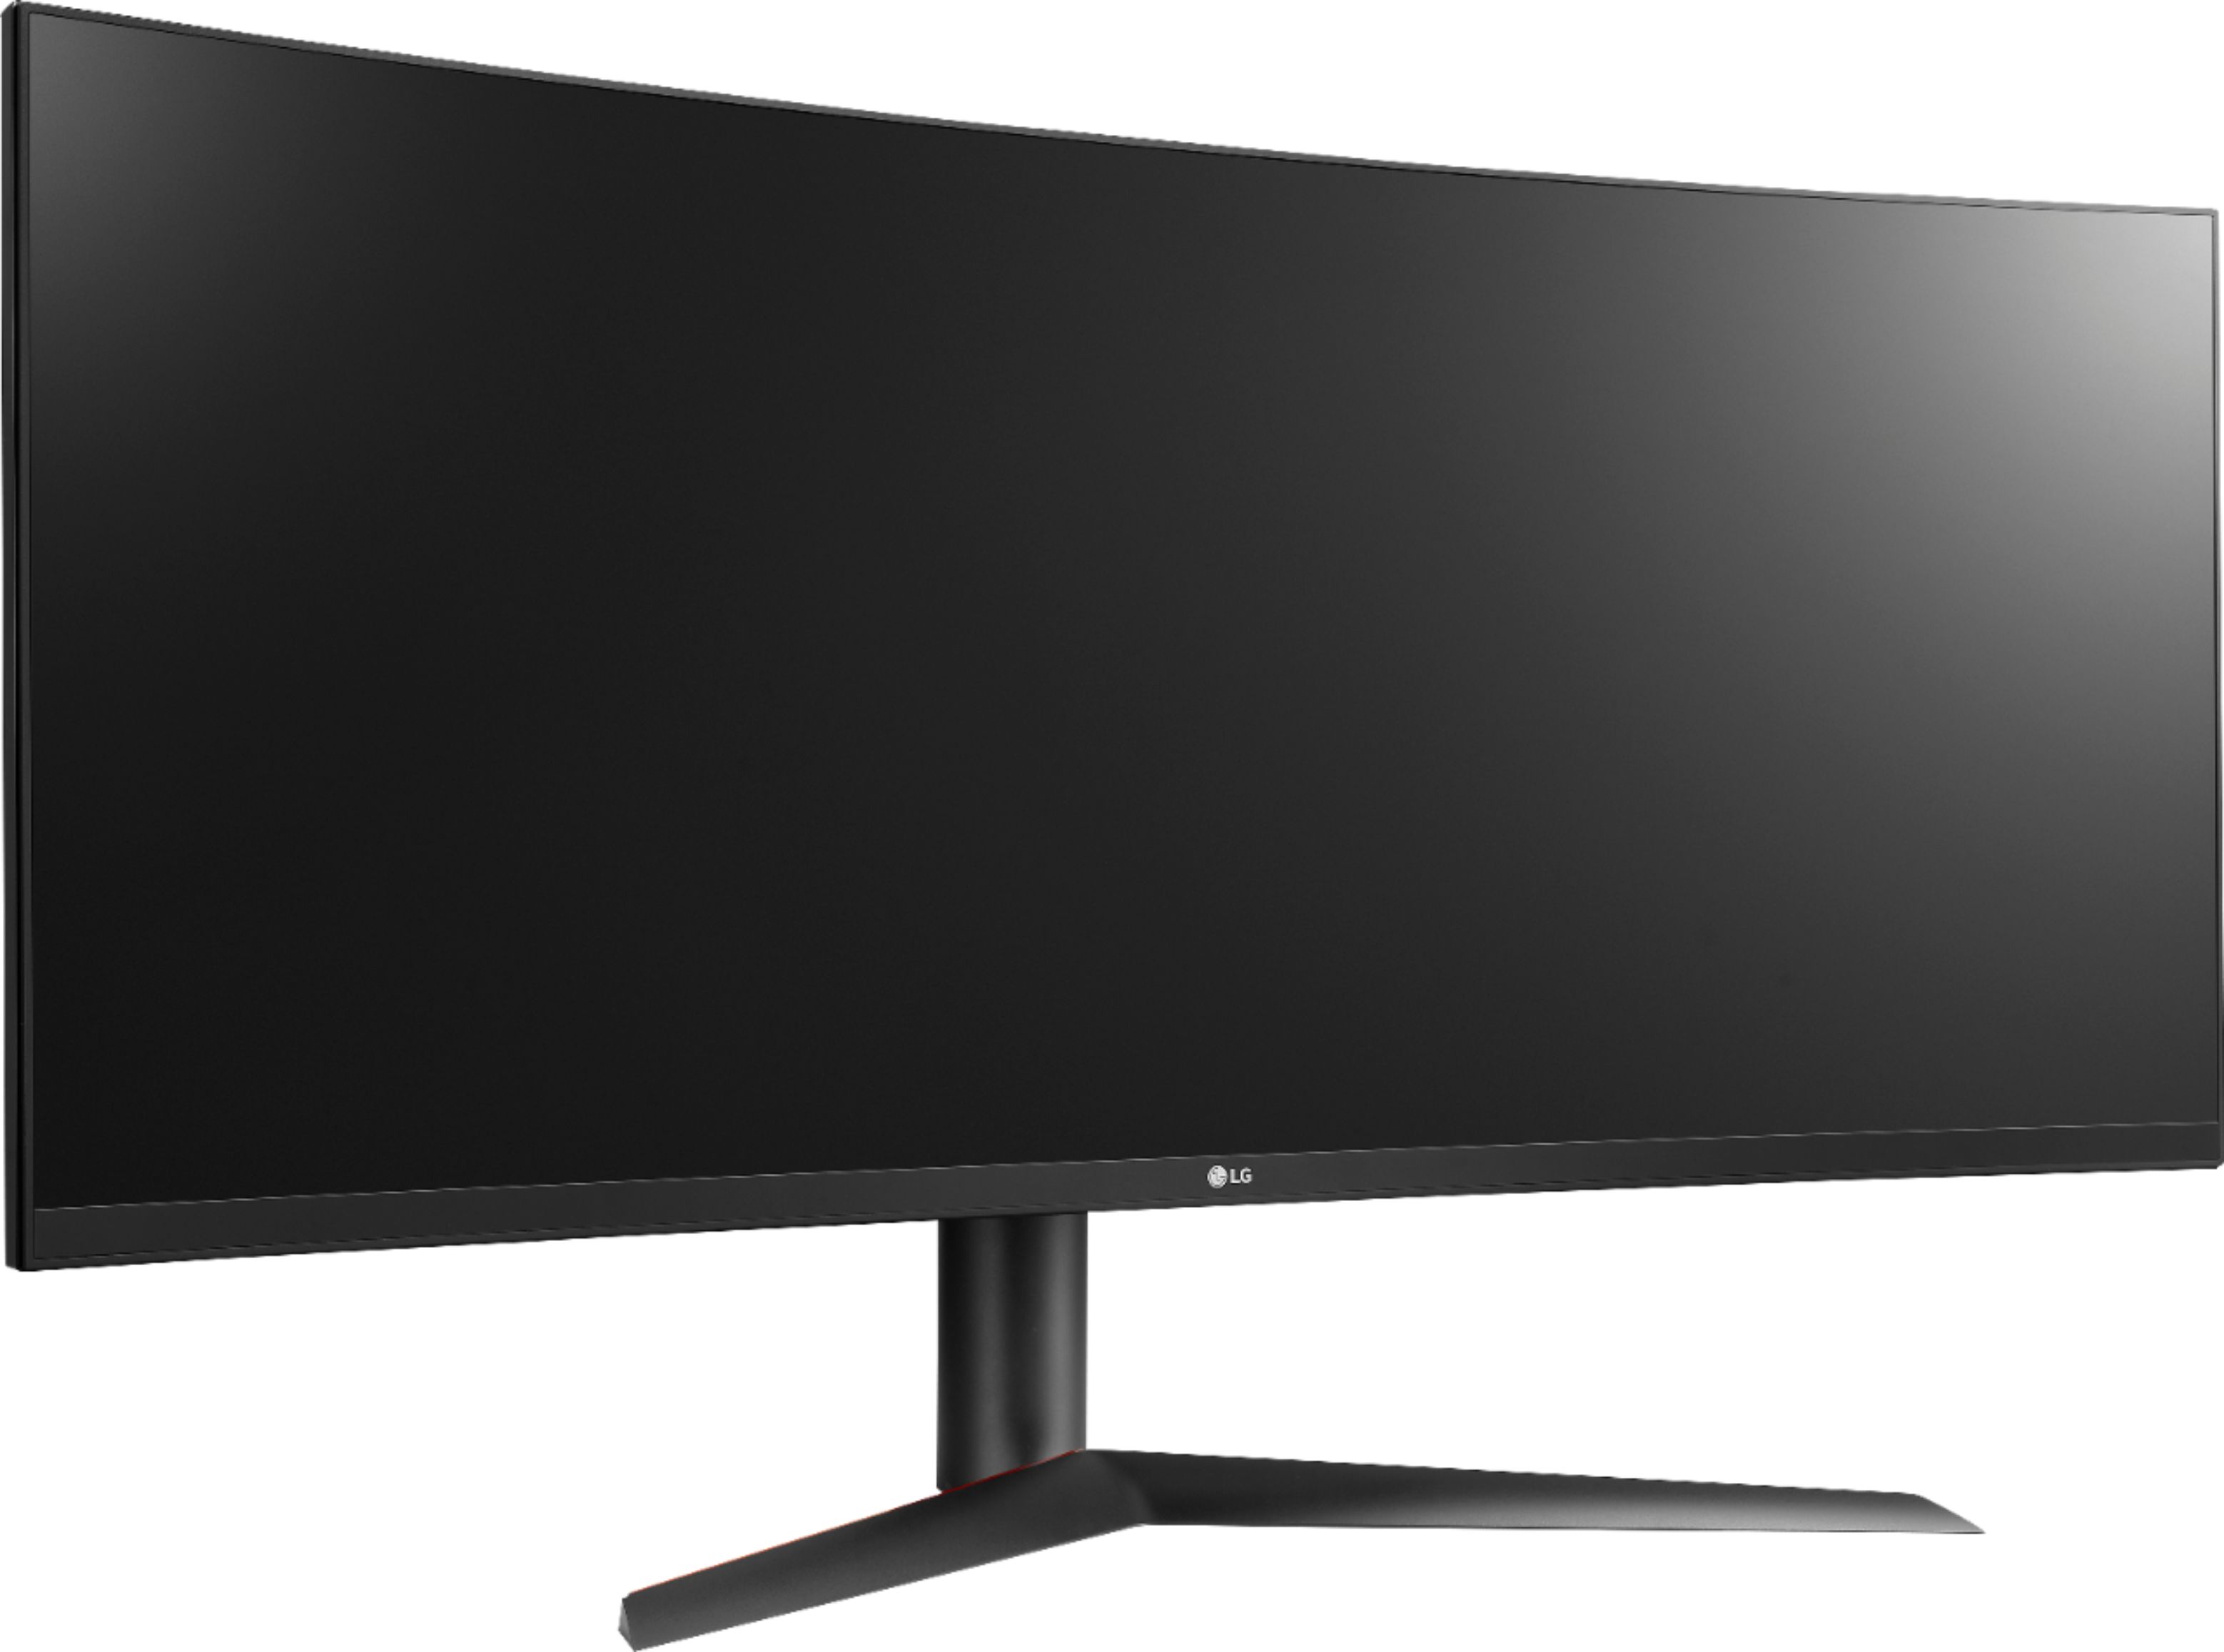 Angle View: LG - 27'' TAA IPS FHD Monitor with USB Type-C - Black